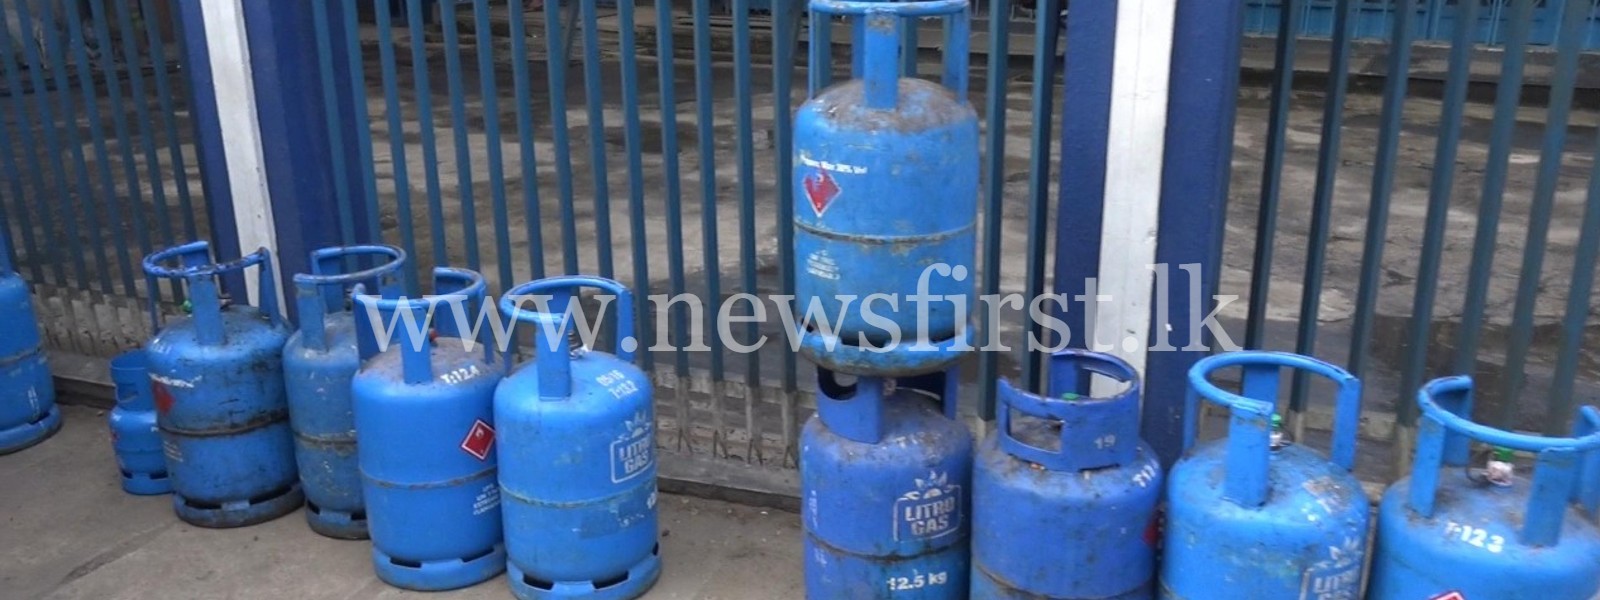 Distribution of gas restricted due to irregularities: Litro